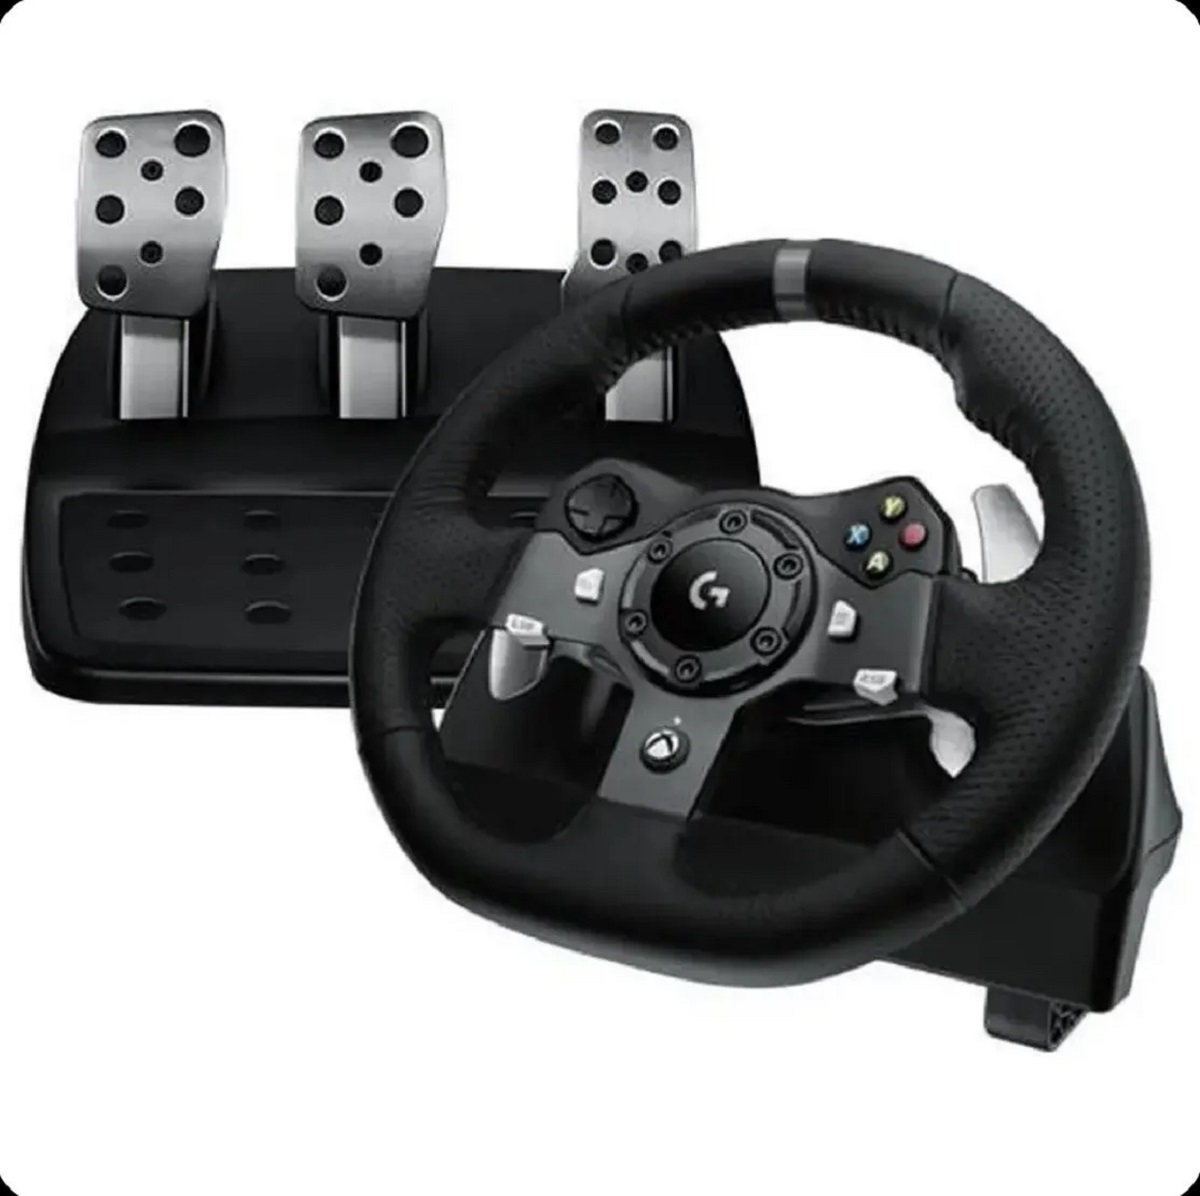 How To Use G920 Driving Force Racing Wheel For Xbox One With PC